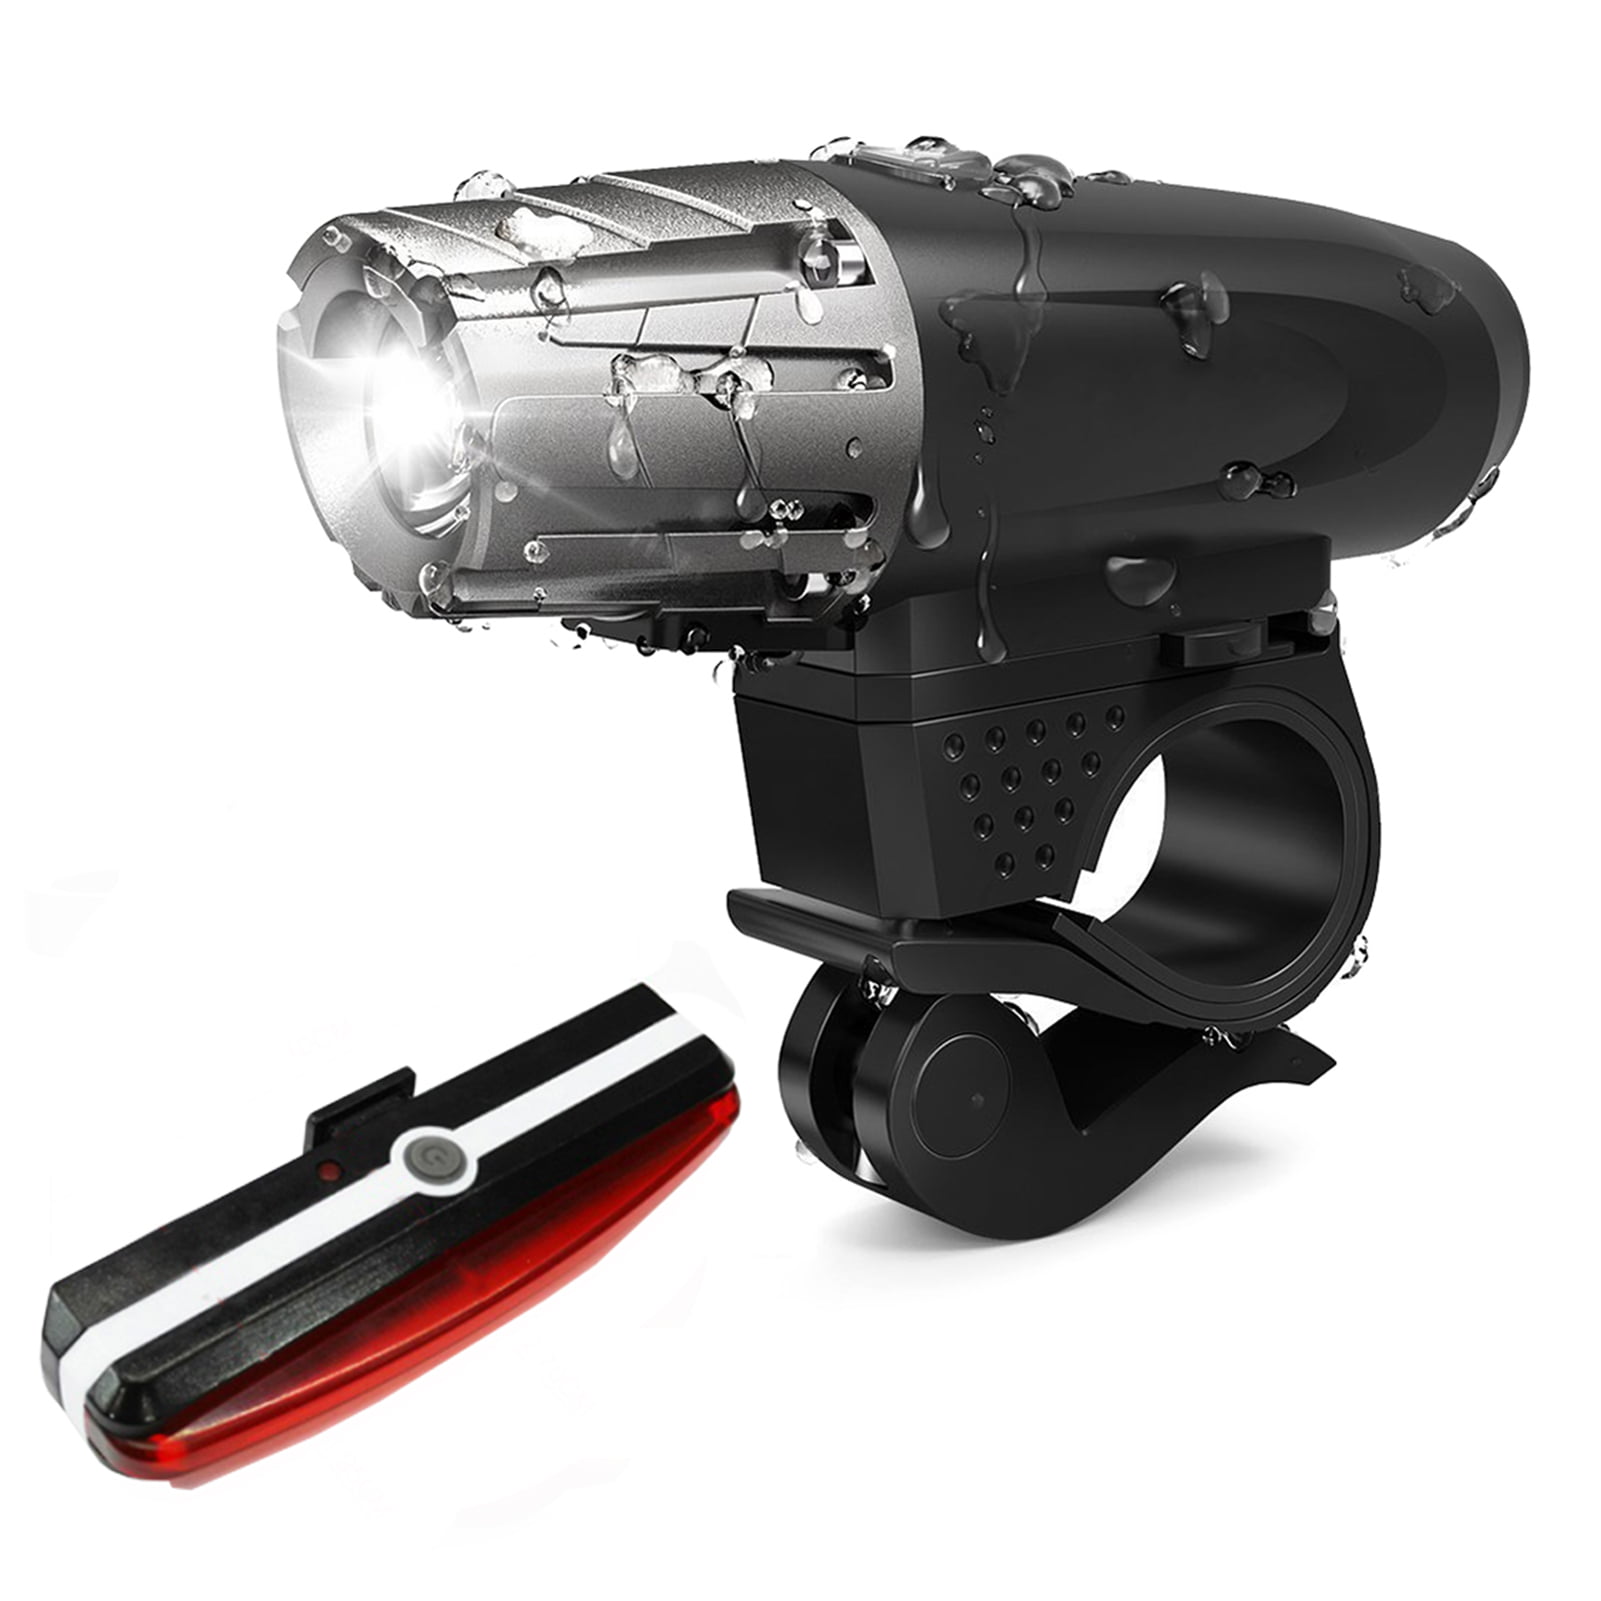 Details about   USB Rechargeable LED Bicycle Light Bike Rear Lamp Front Headlight &Taillight Set 